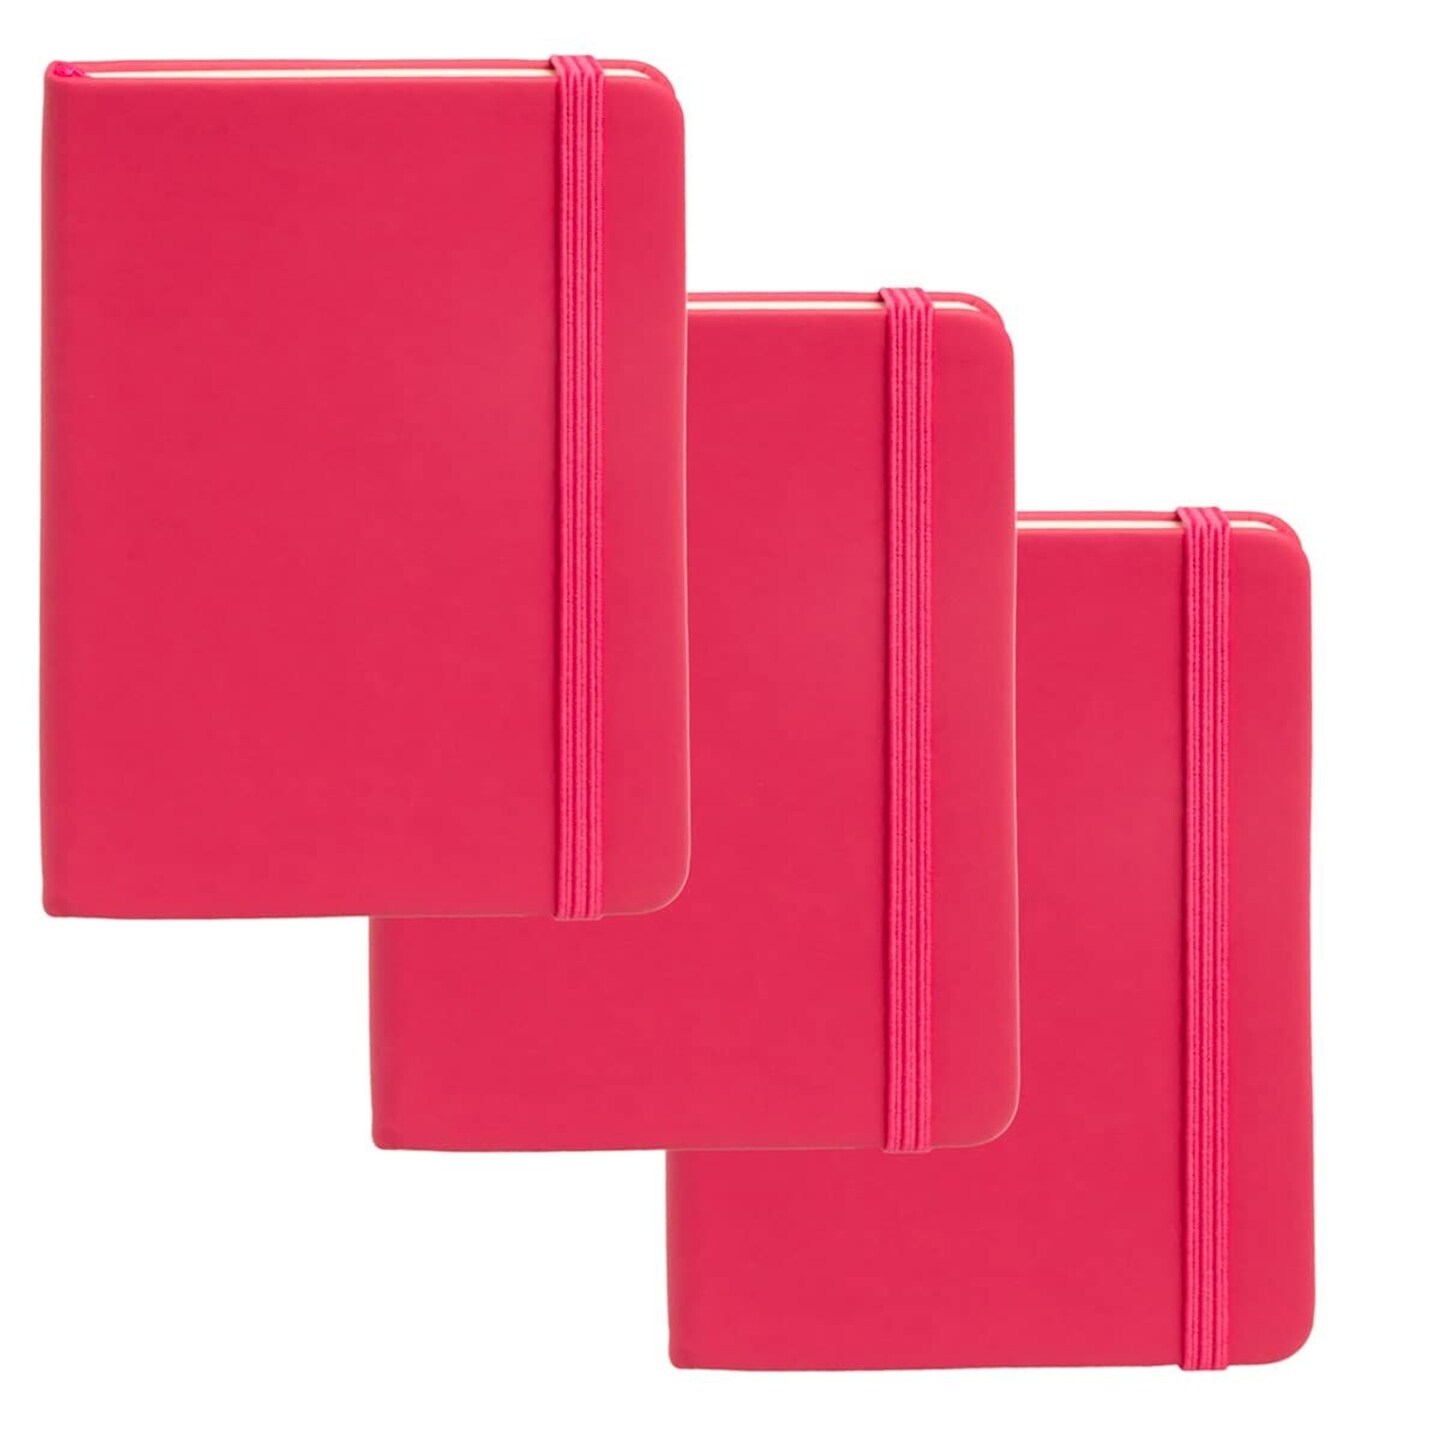 Simply Genius A6 Pocket Size Mini Notebooks with Hardcover - Ruled Small Pocket Journal Set for School, Home &#x26; Office - 124 pages (3.7&#x22; x 5.7&#x22;) with Inner Pocket (Pink, 3 Pack)